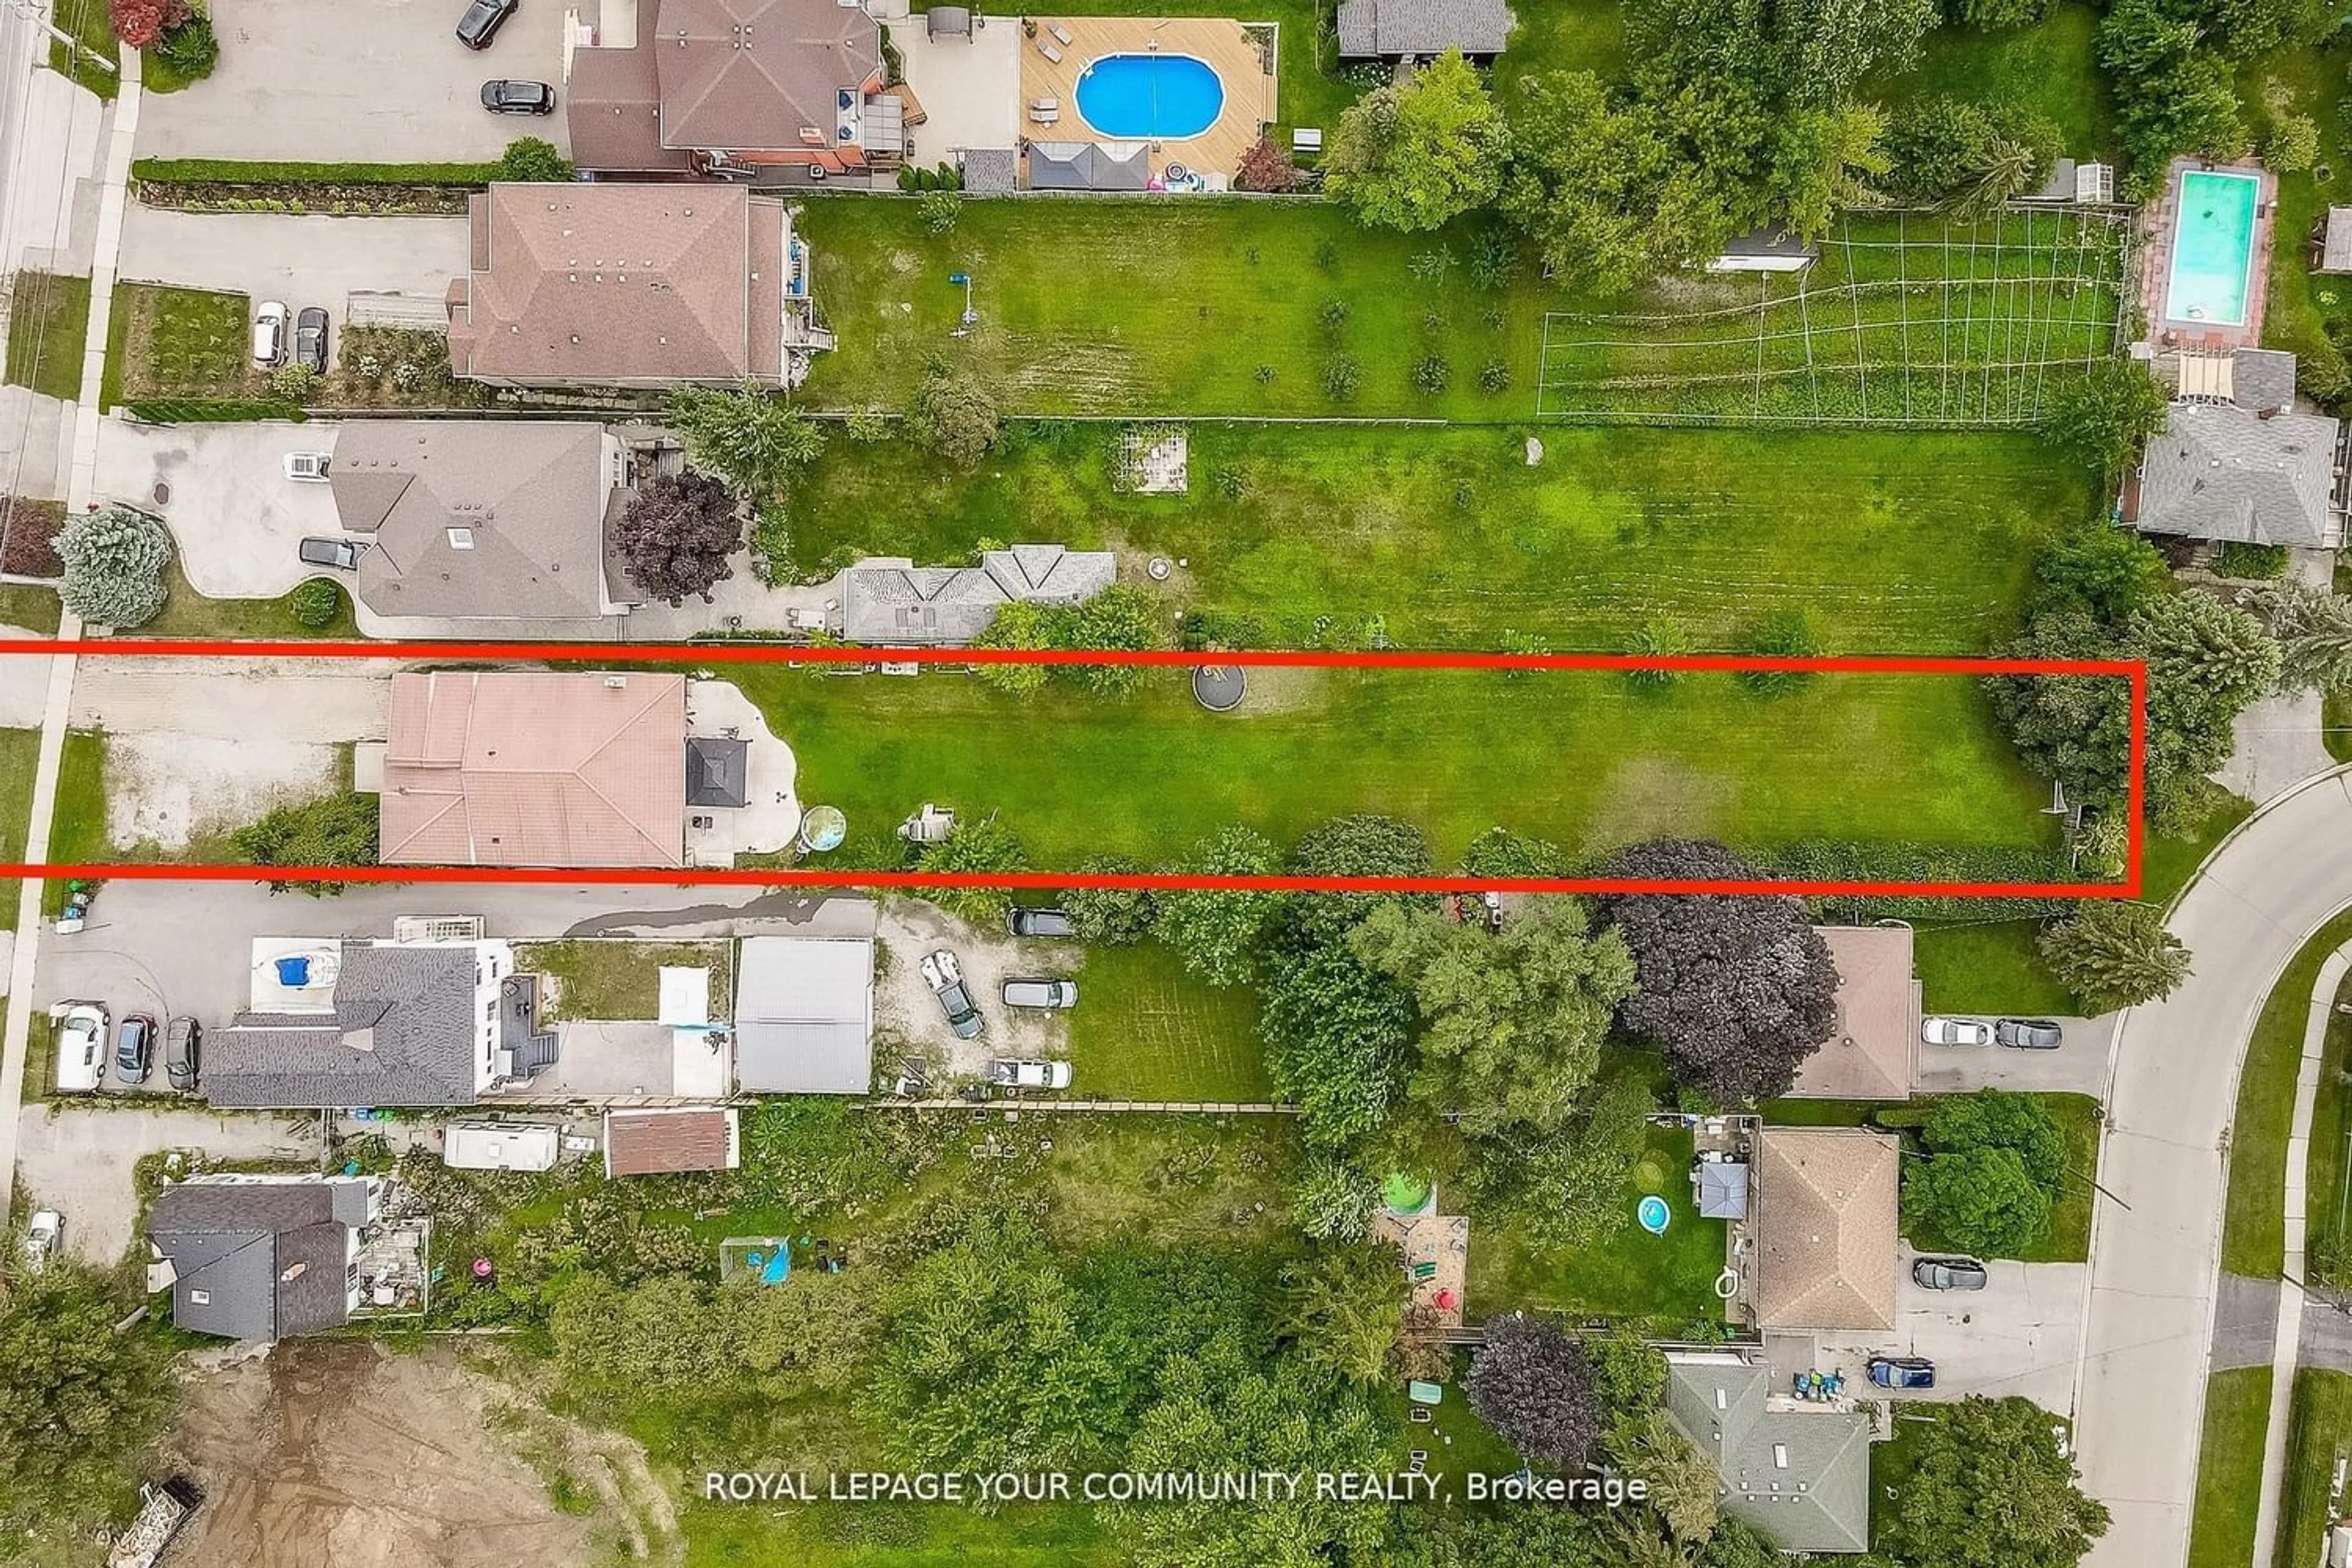 Frontside or backside of a home for 1428 Cawthra Rd, Mississauga Ontario L5G 4L2